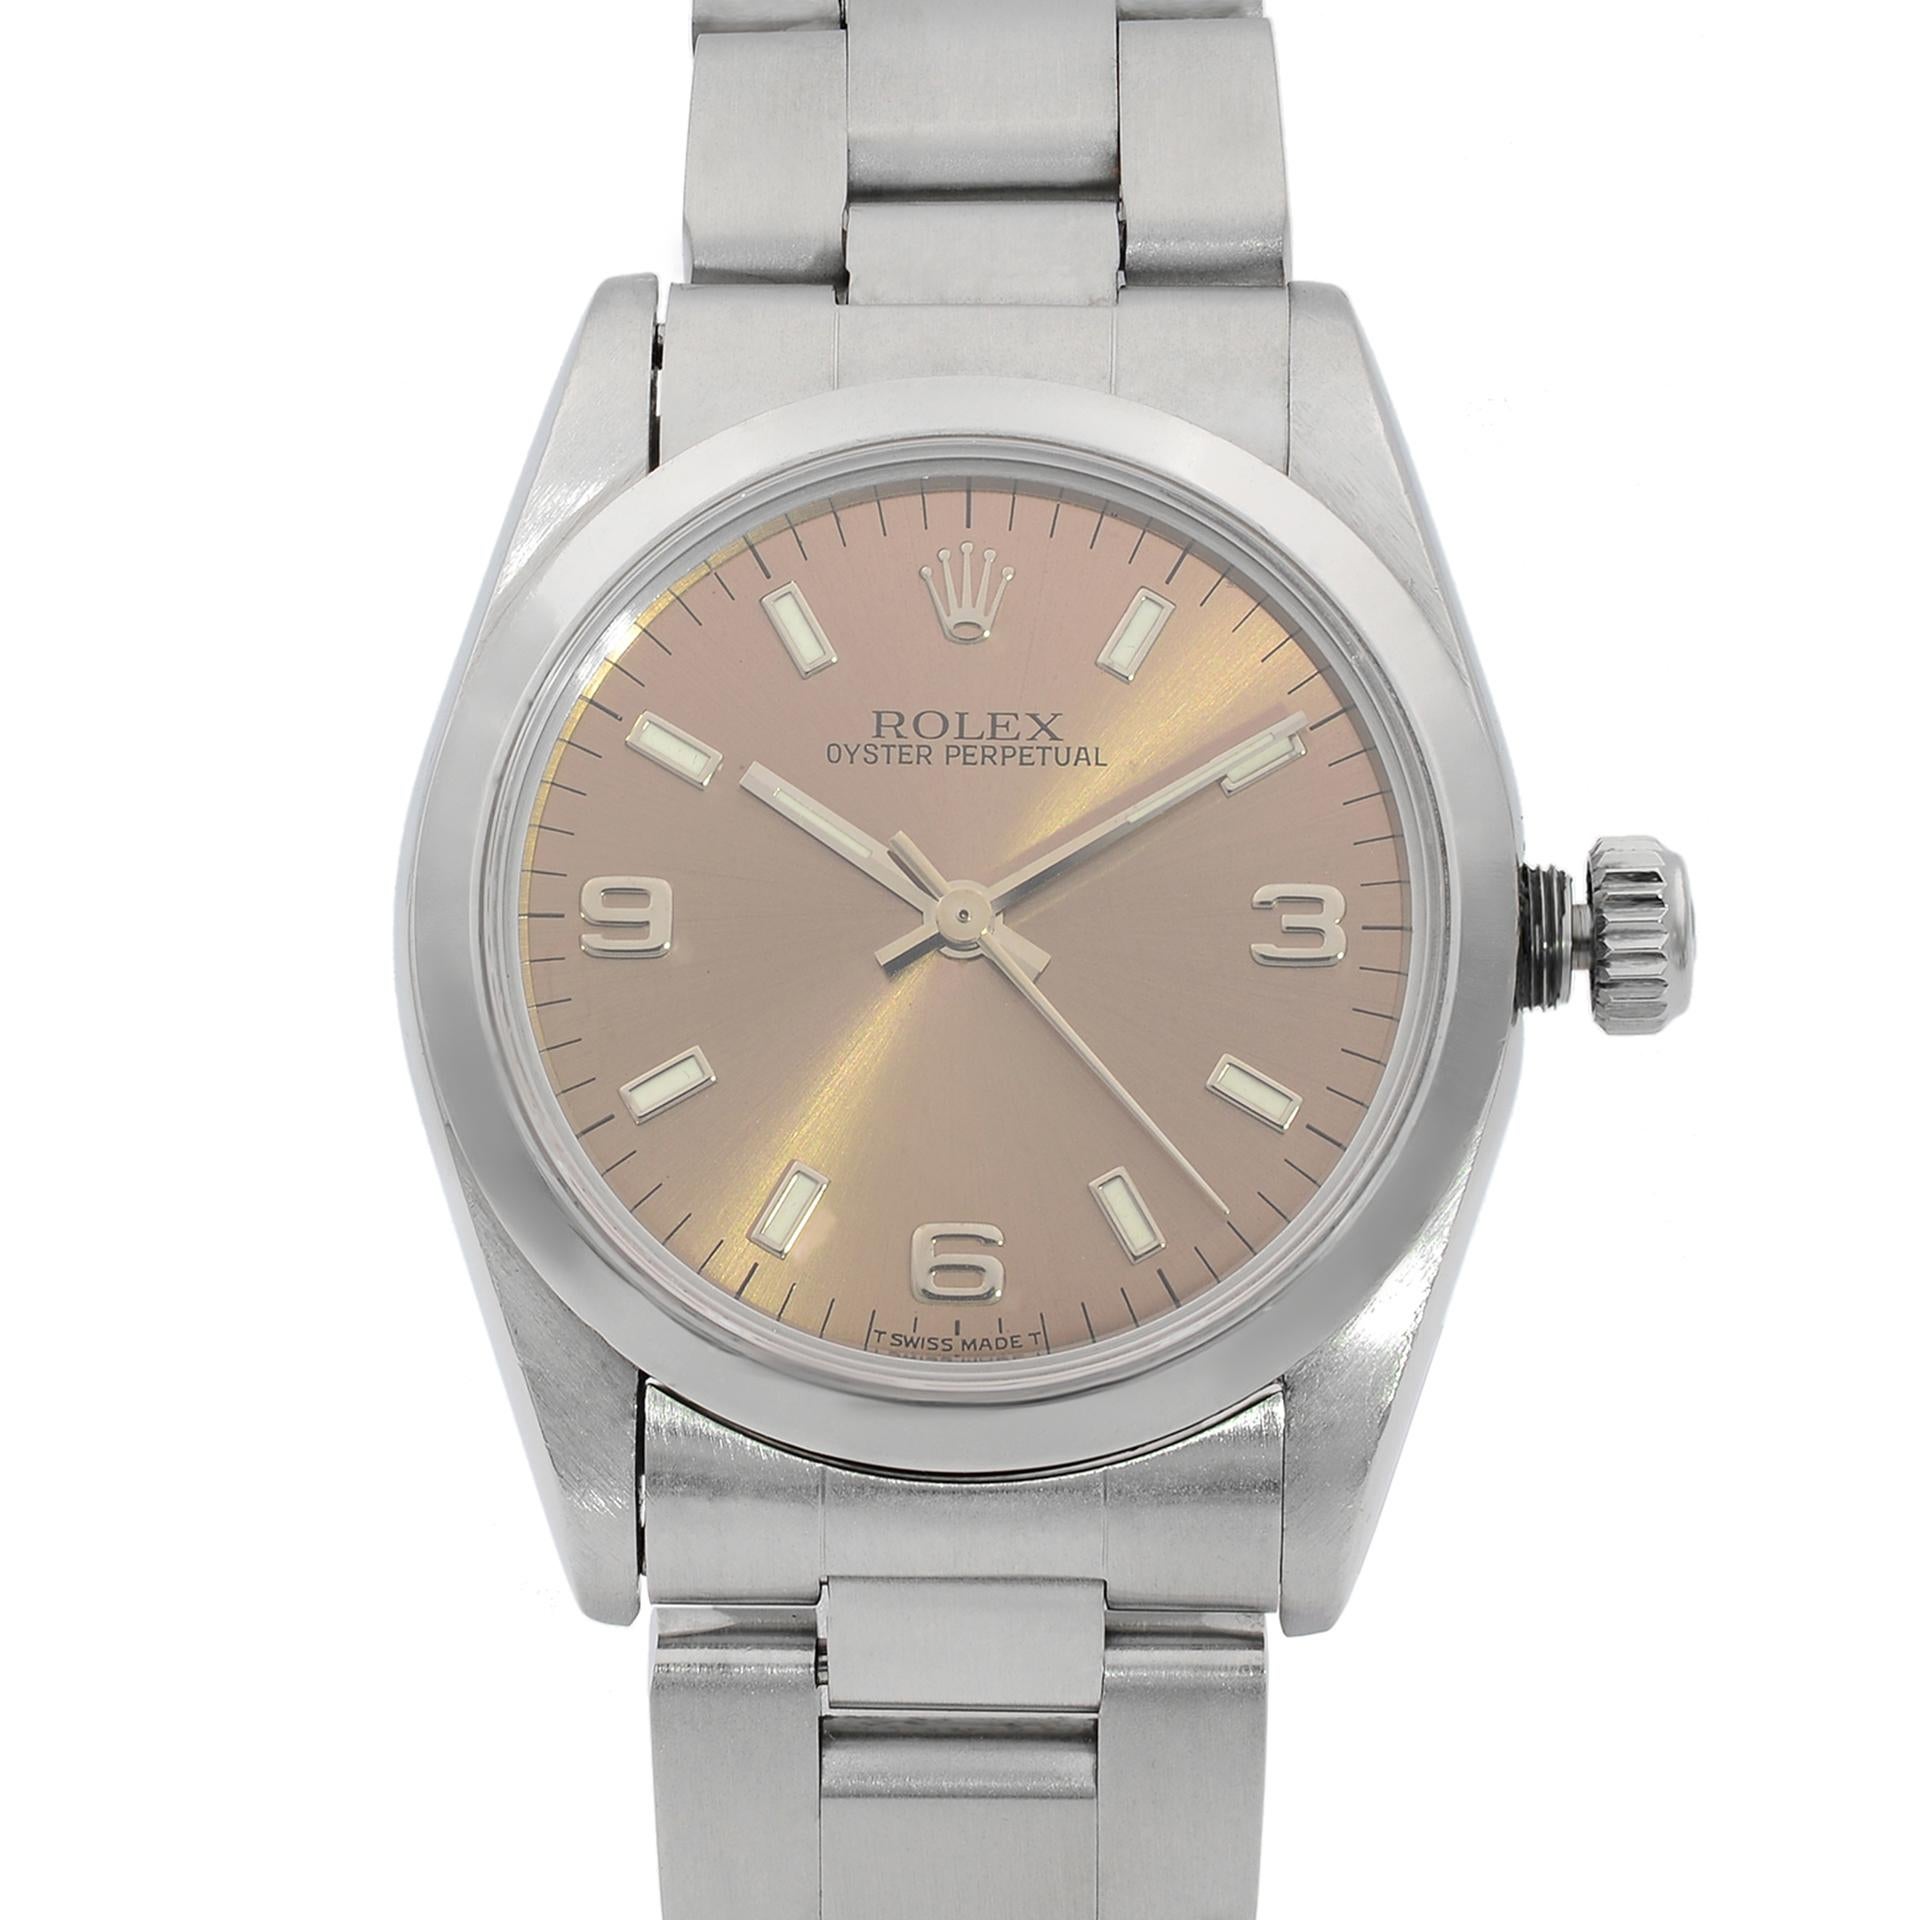 This pre-owned Rolex Oyster Perpetual 67480 is a beautiful Ladie's timepiece that is powered by mechanical (automatic) movement which is cased in a stainless steel case. It has a round shape face,  dial and has hand sticks & numerals style markers.